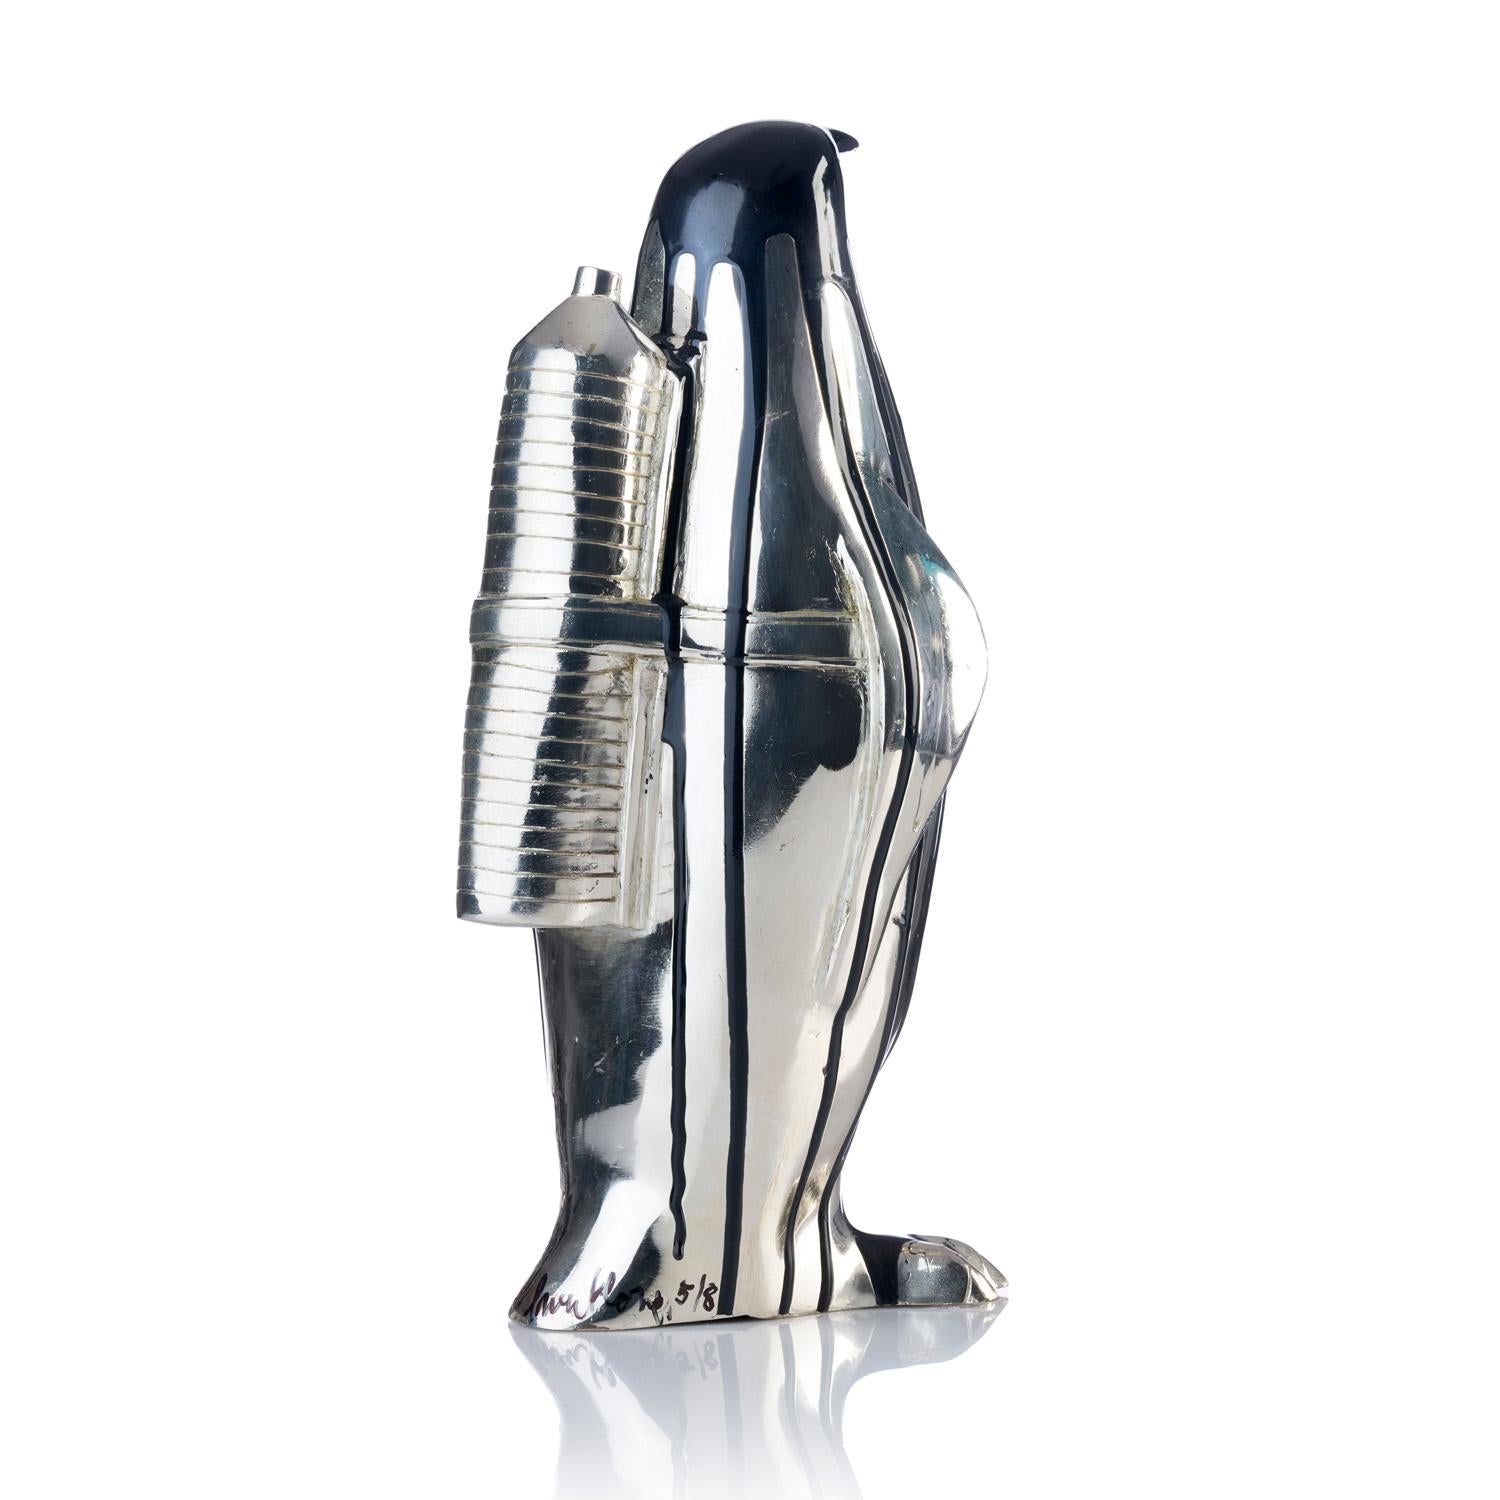 Cloned Penguin with pet bottle (black)  - Sculpture by William Sweetlove